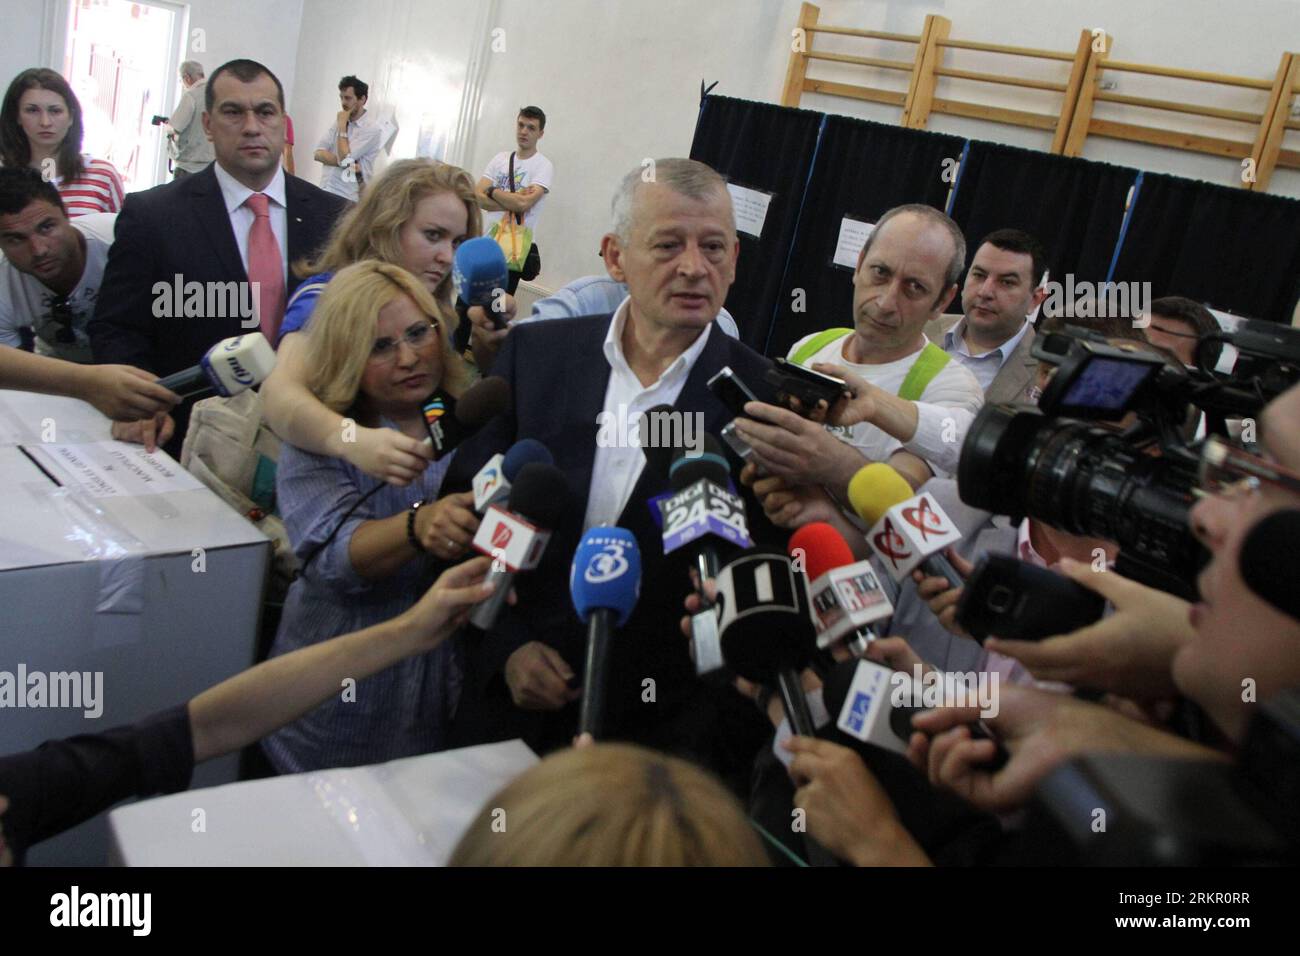 Bildnummer: 58090673  Datum: 10.06.2012  Copyright: imago/Xinhua (120610) -- BUCHAREST, June 10, 2012 (Xinhua) -- Mayoral candidate and current mayor of Bucharest Sorin Oprescu speaks to the media after casting his ballot at a polling station in Bucharest, Romania, June 10, 2012. More than half of over 18 million voters Sunday cast their votes in Romania s quadrennial local elections and the Social Liberal Union (USL) seems to have won a landslide victory, according to the exit polls. (Xinhua/Gabriel Petrescu) ROMANIA-BUCHAREST-LOCAL ELECTION PUBLICATIONxNOTxINxCHN People Politik Wahl xjh x0x Stock Photo